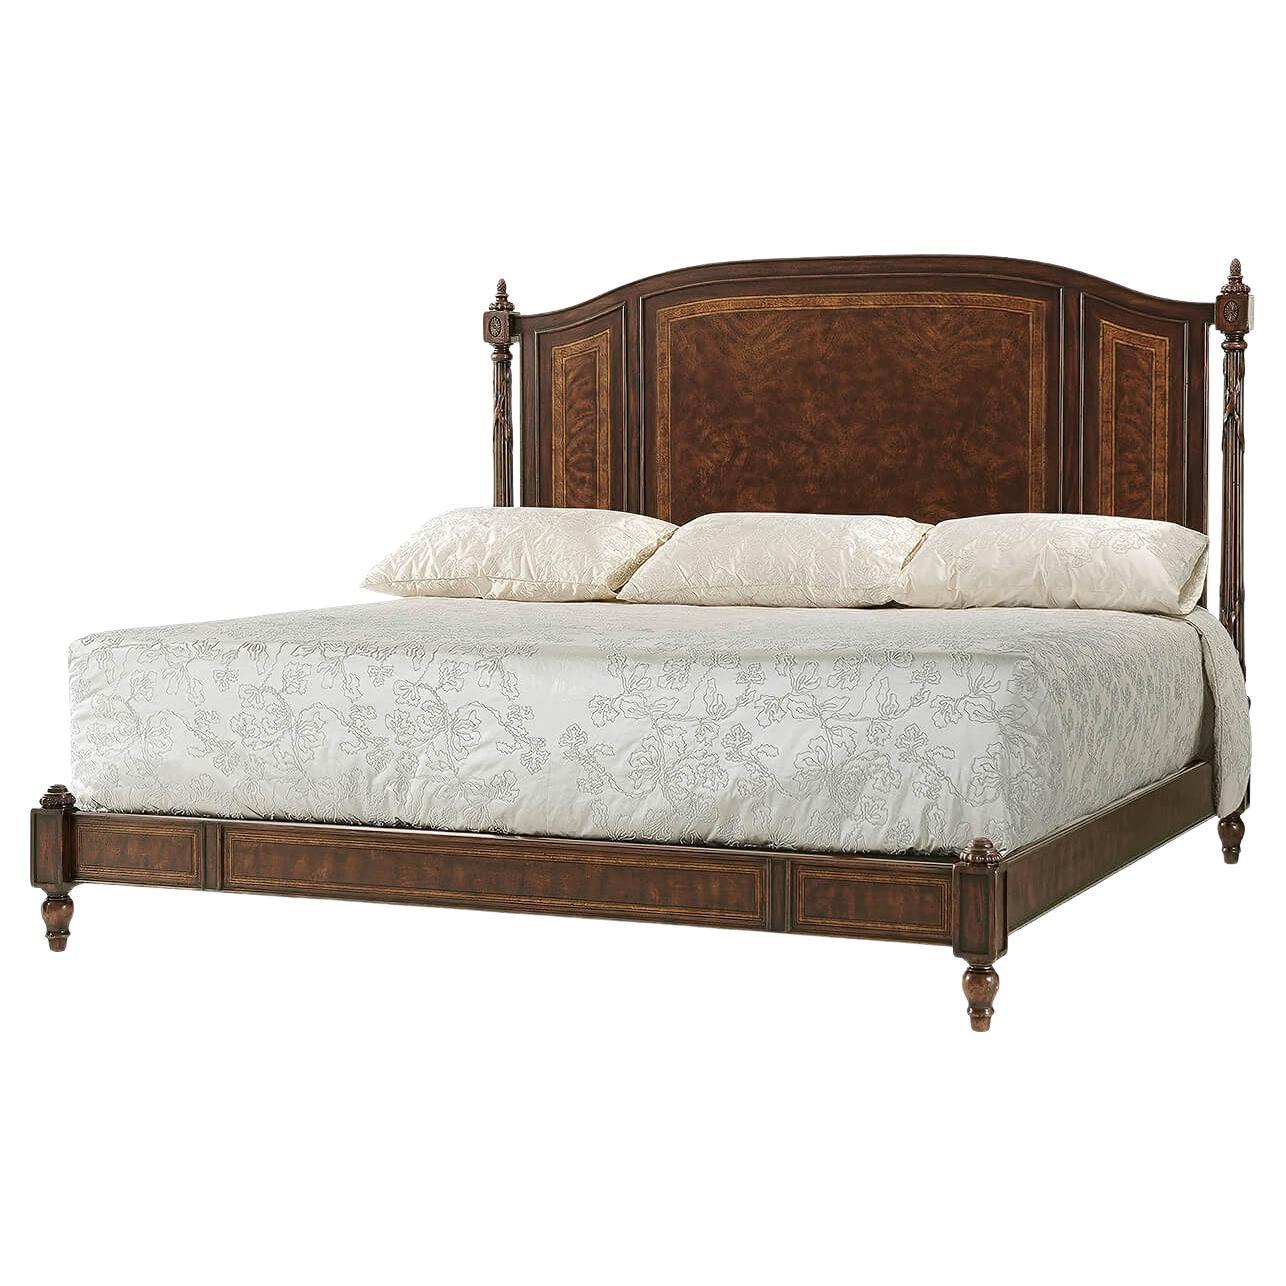 Classical Polished King Size Bed